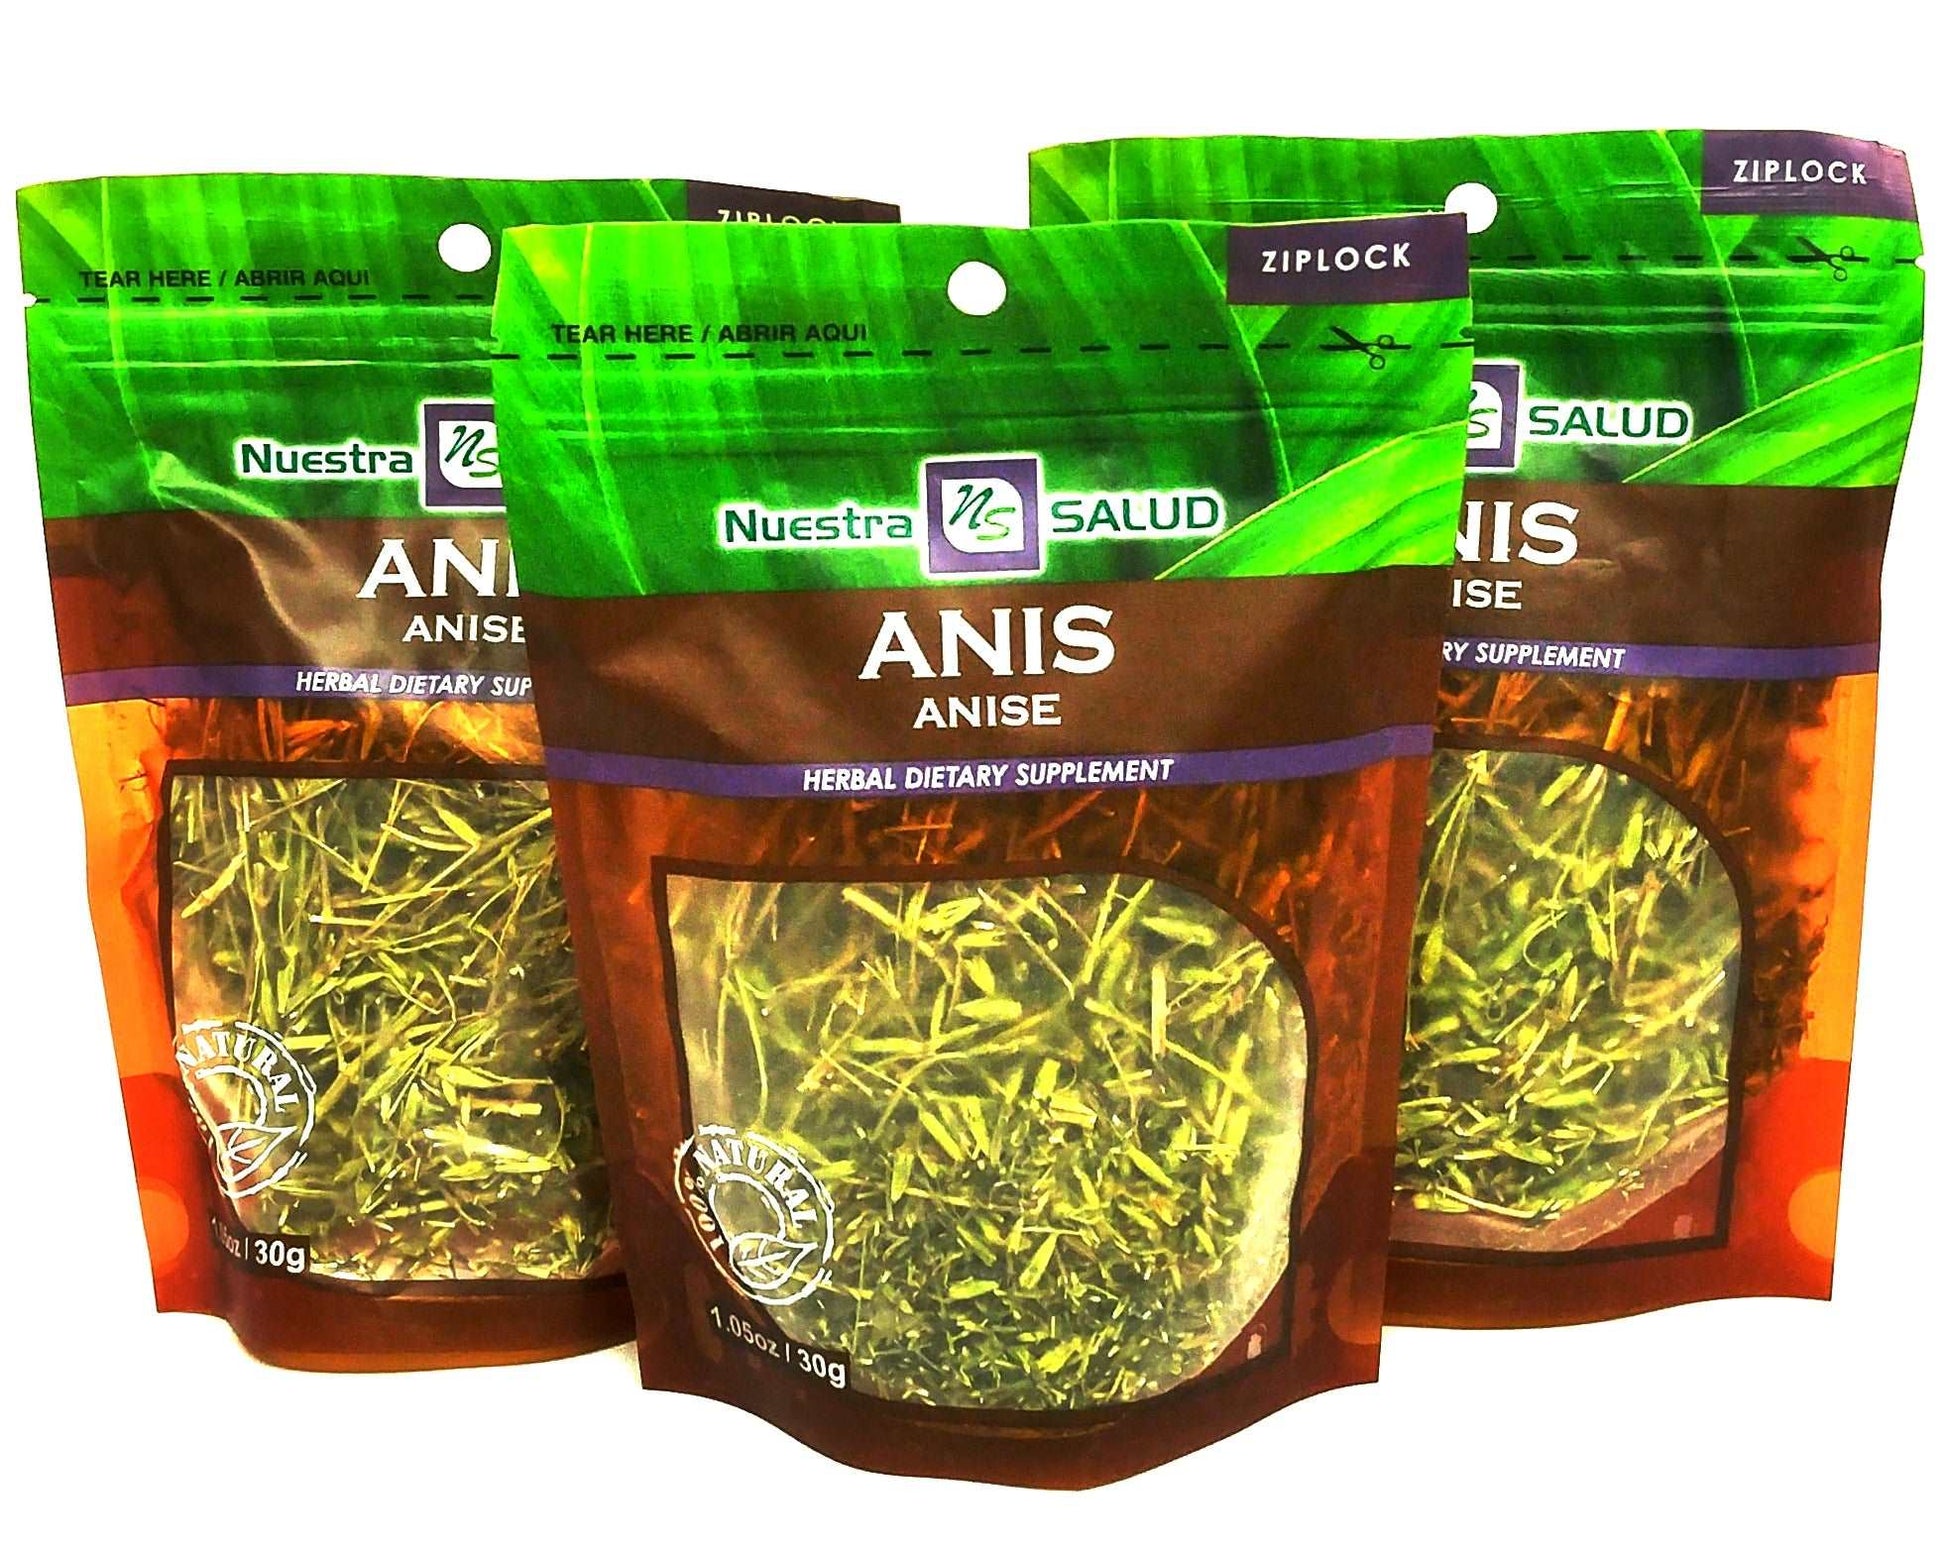  Anise Loose Herbal Infusion Tea Anis Value Pack (90g) by Nuestra Salud sold by NS Herbs Co.